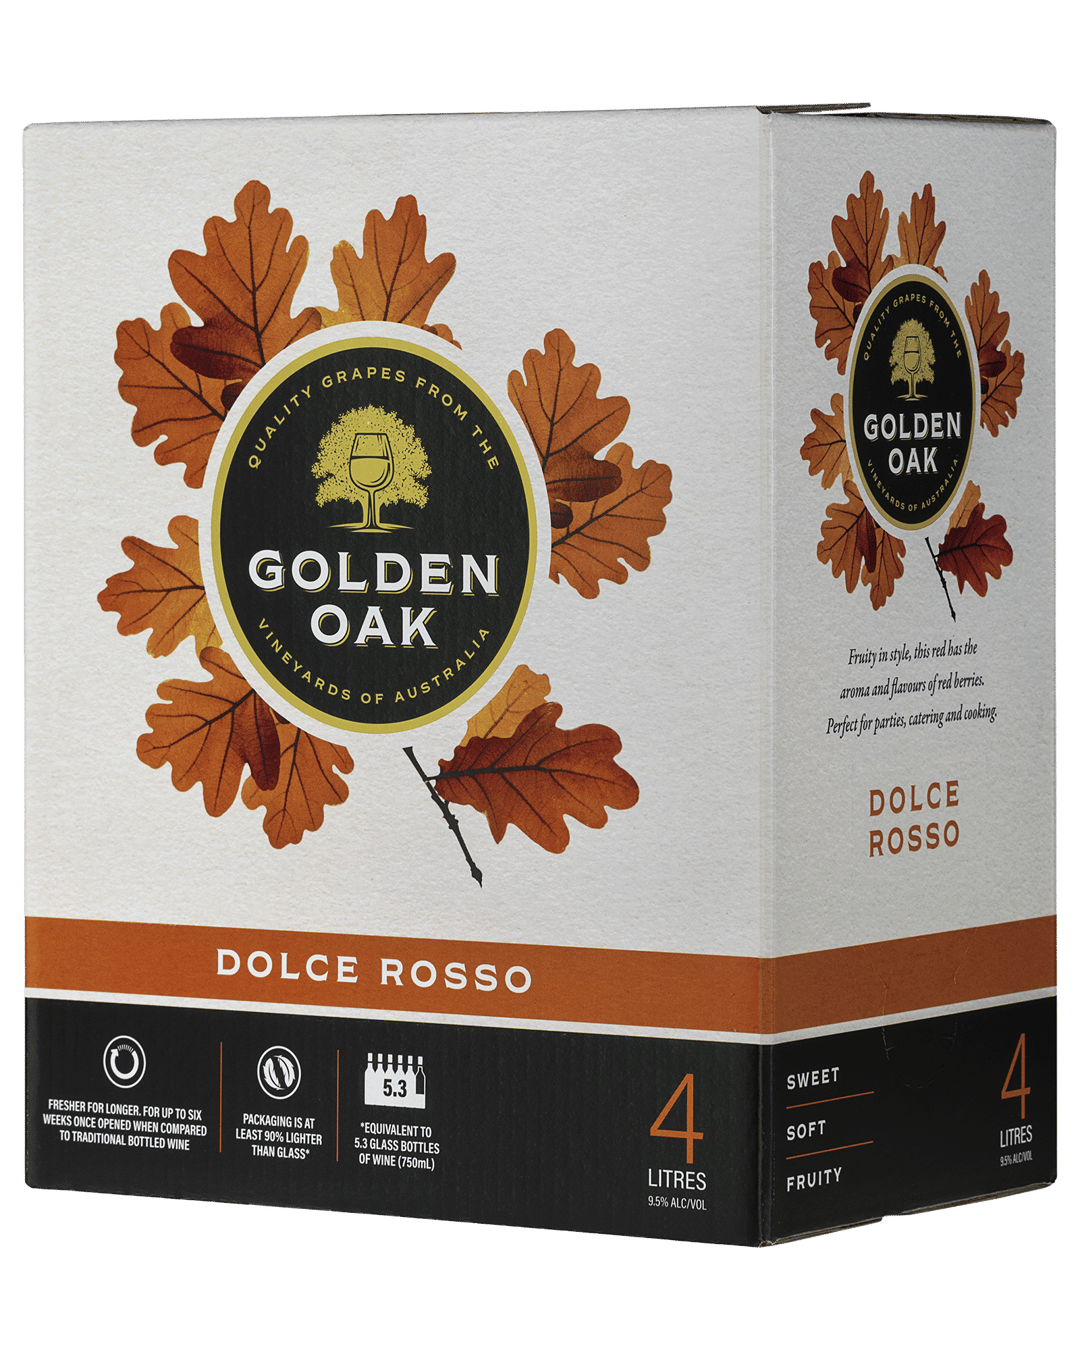 Stanley Dolce Rosso Cask 4L